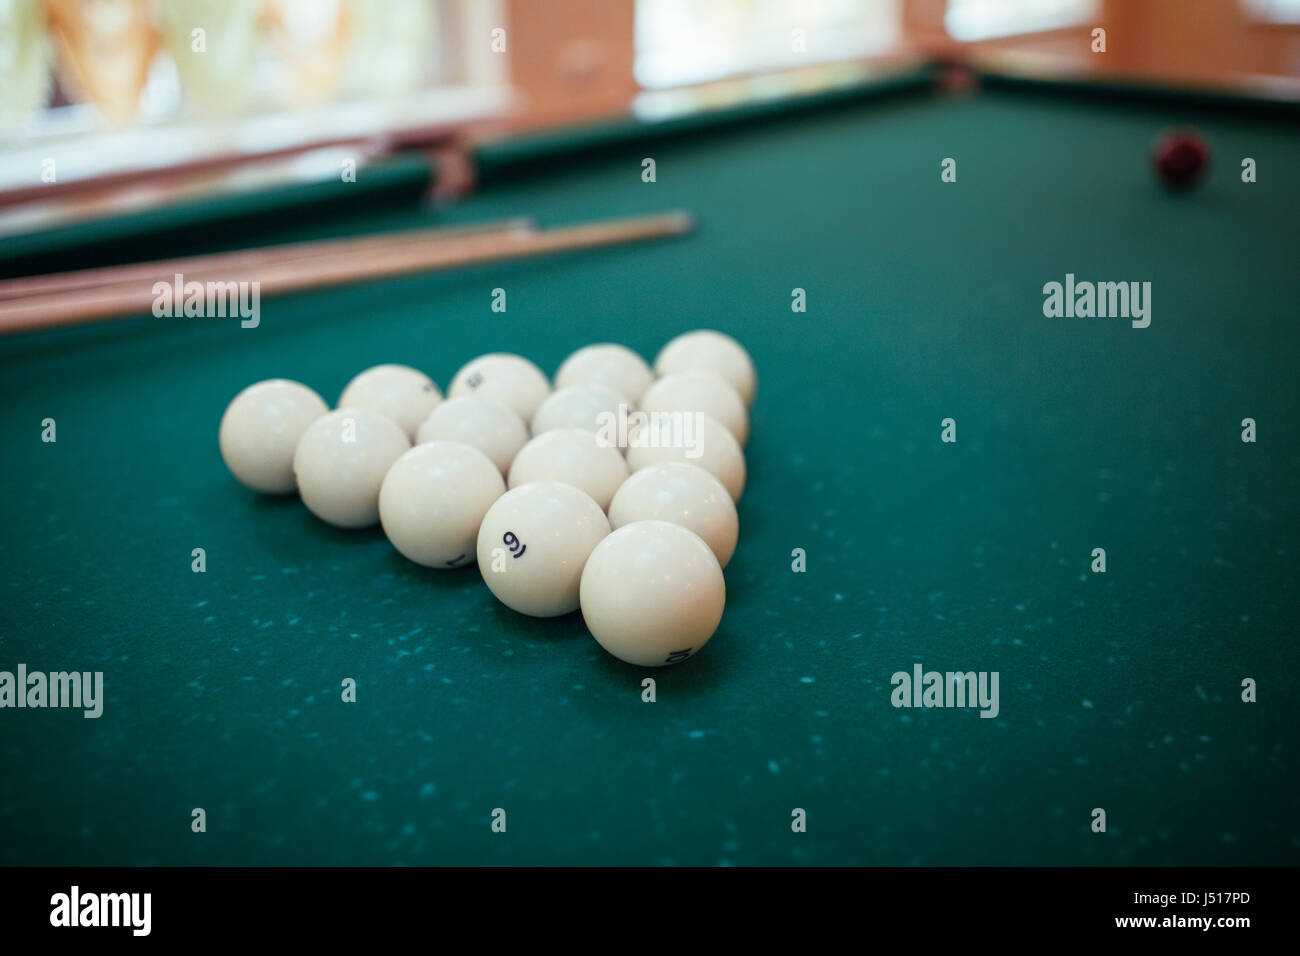 Billiard balls and two Cues in the form of a triangle on the billiard table are ready for the game. Stock Photo